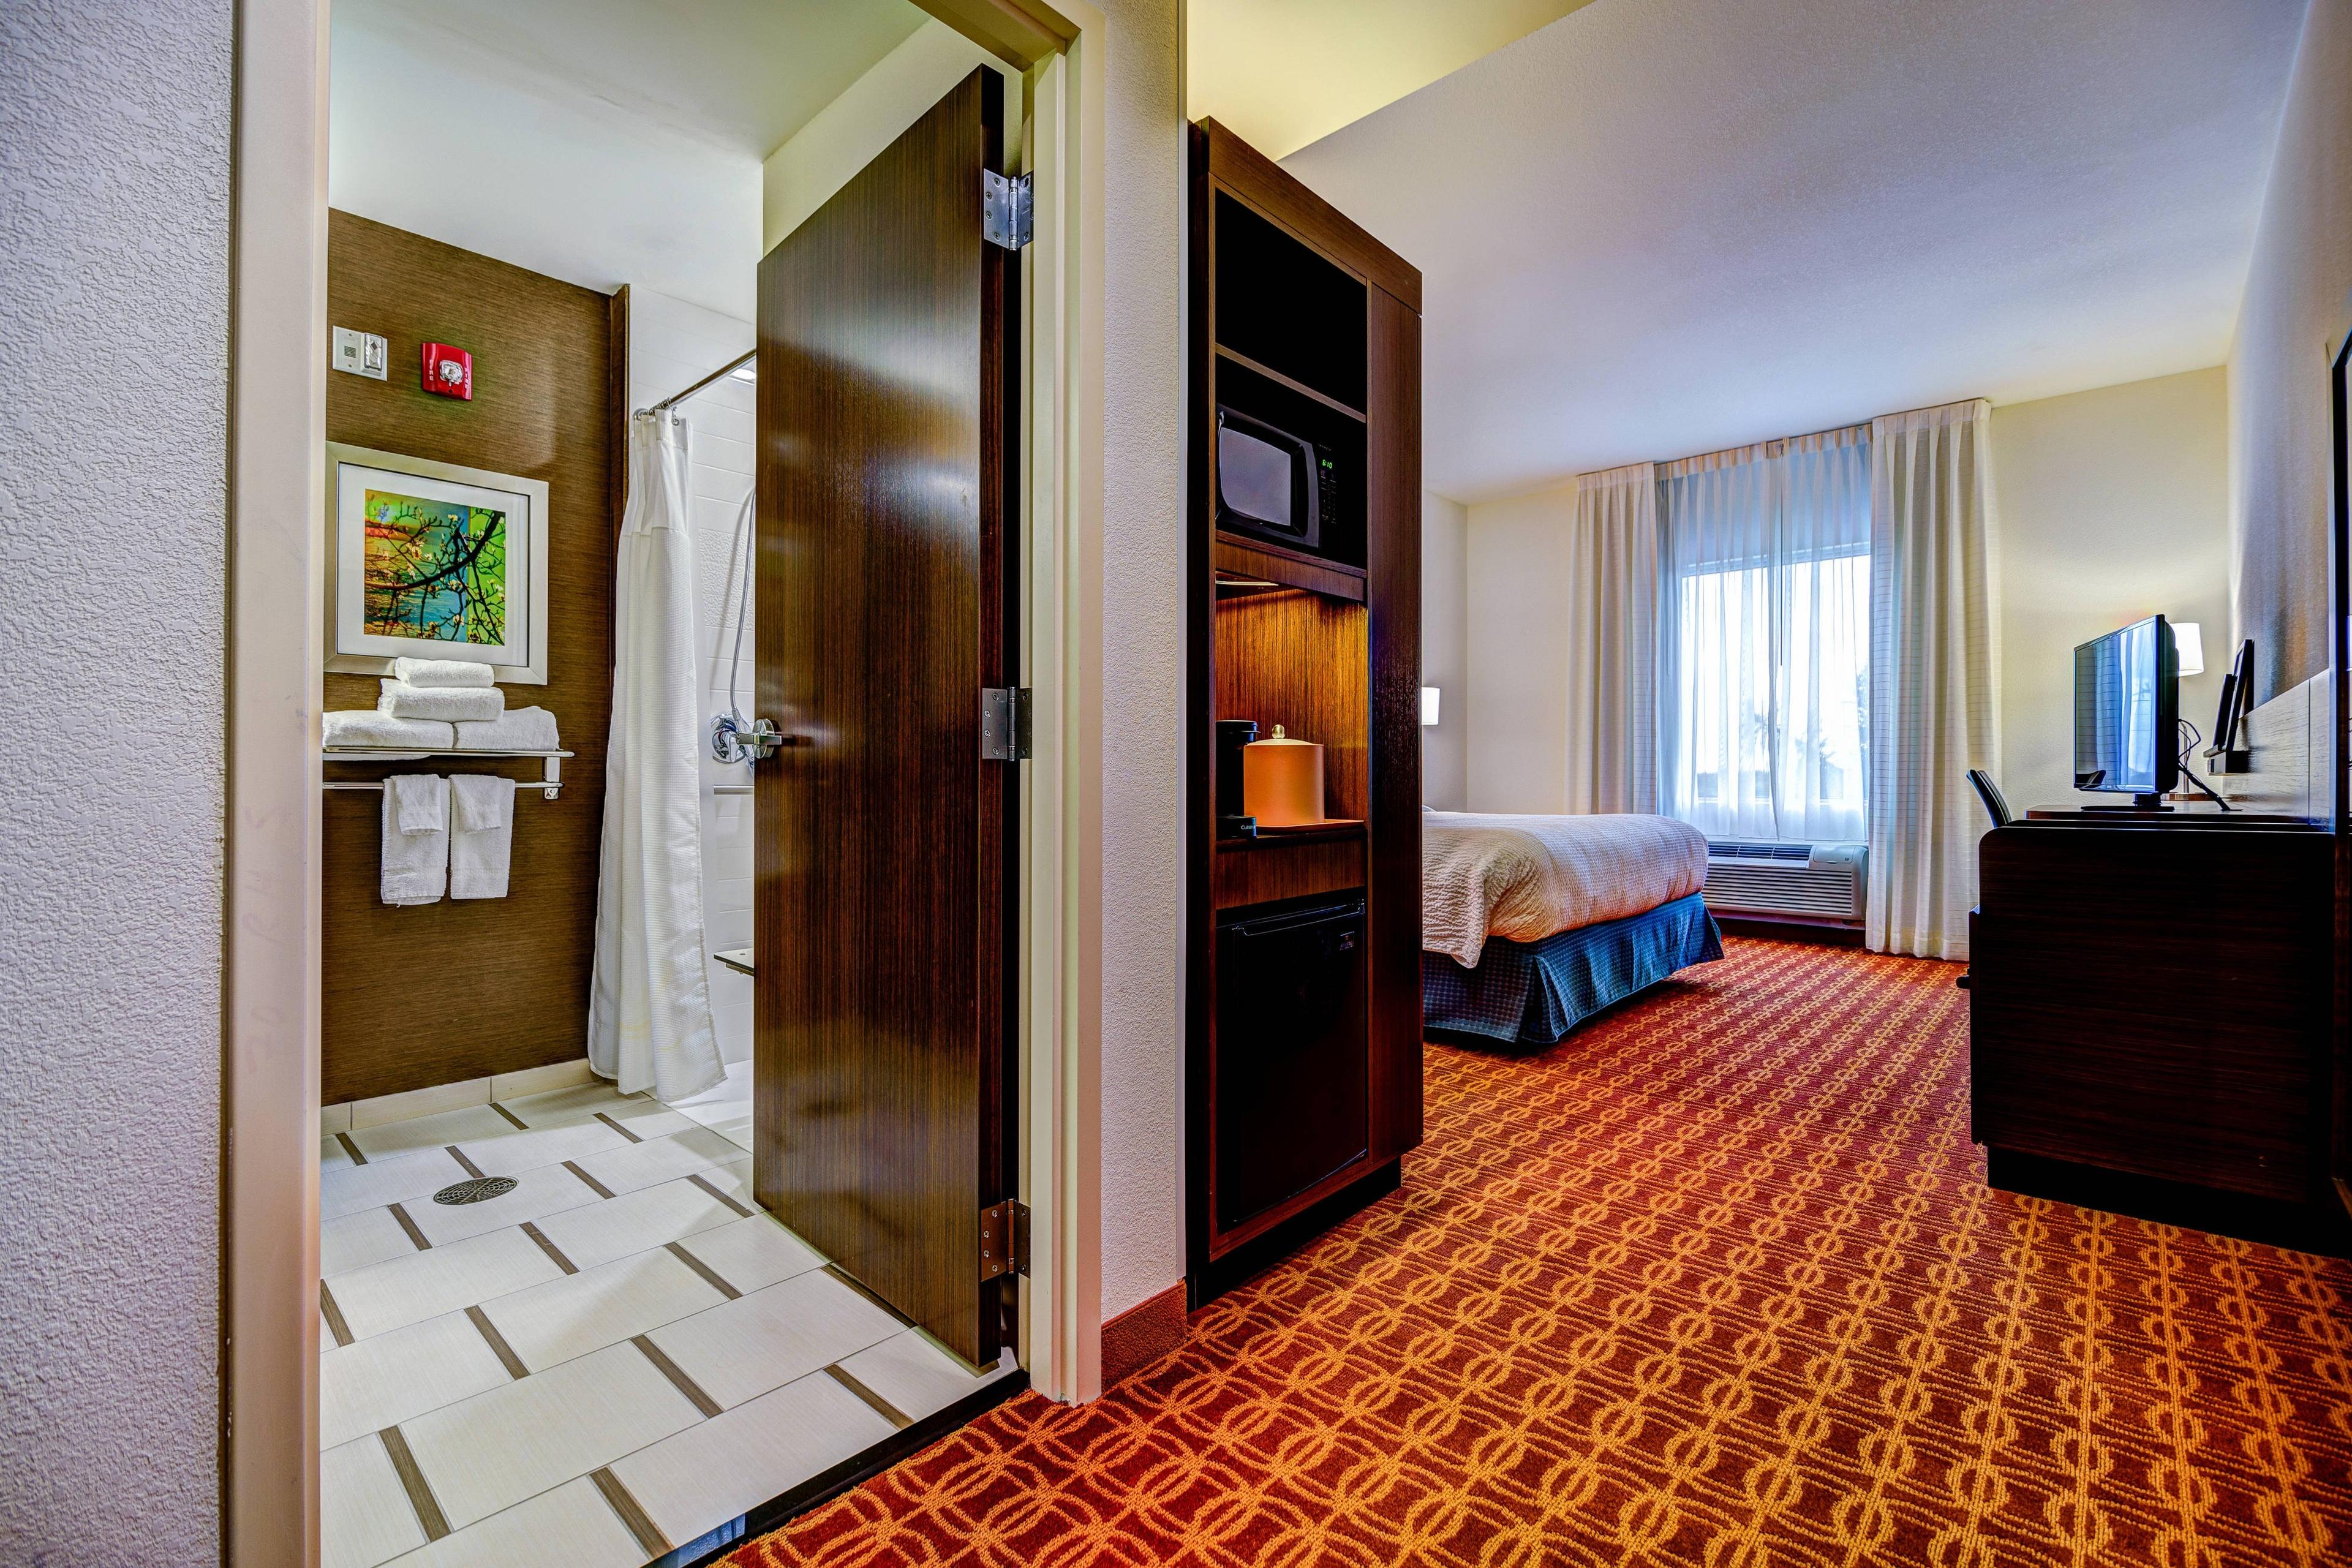 The accessible guest rooms are equipped with conveniences to enhance your stay. The wider doorways, doorbell and lower peepholes are among those features.